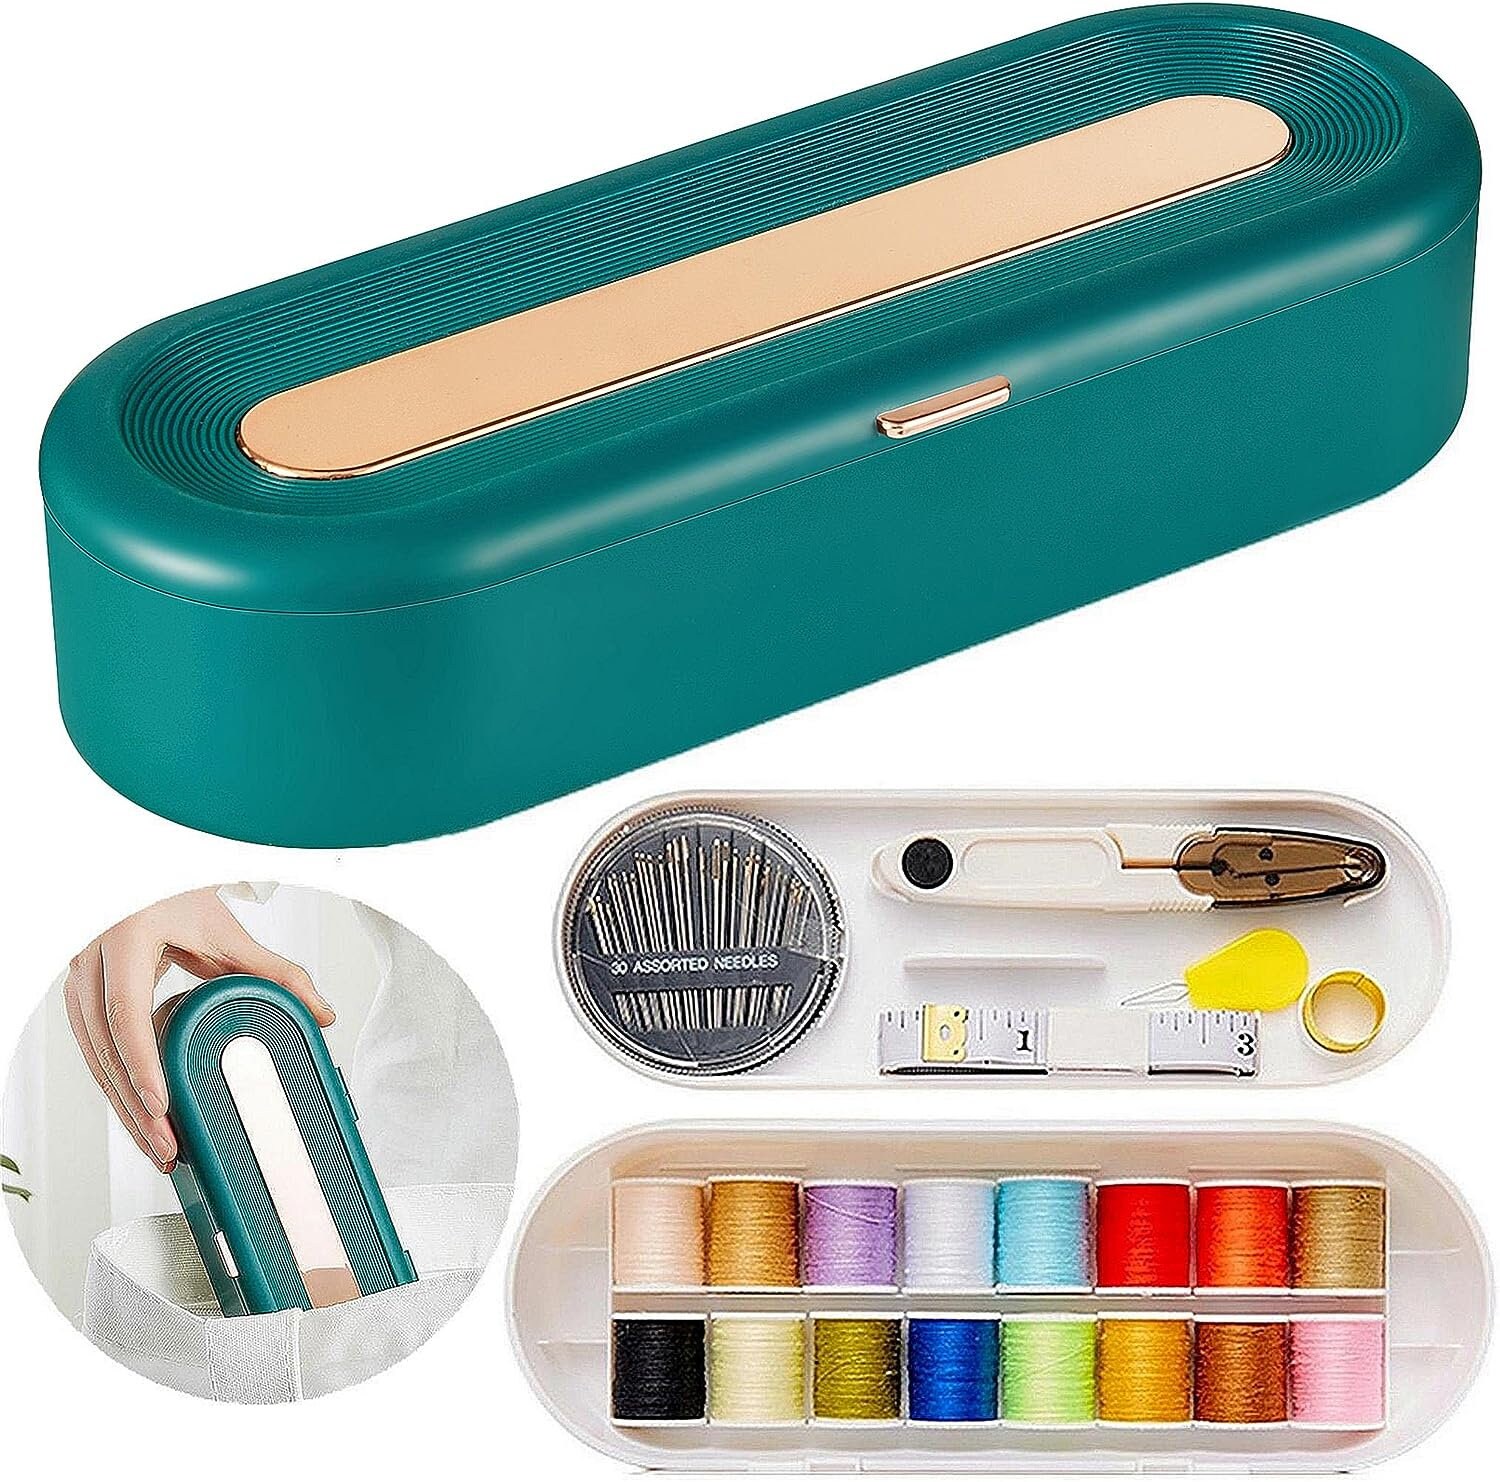 Sewing Kit, Travel Mini Sewing Kits for Adults Supplies Repair Project Kit  Needle Family Sewing Thread Accessories Traveler DIY Organizer (Green  Sewing kit)